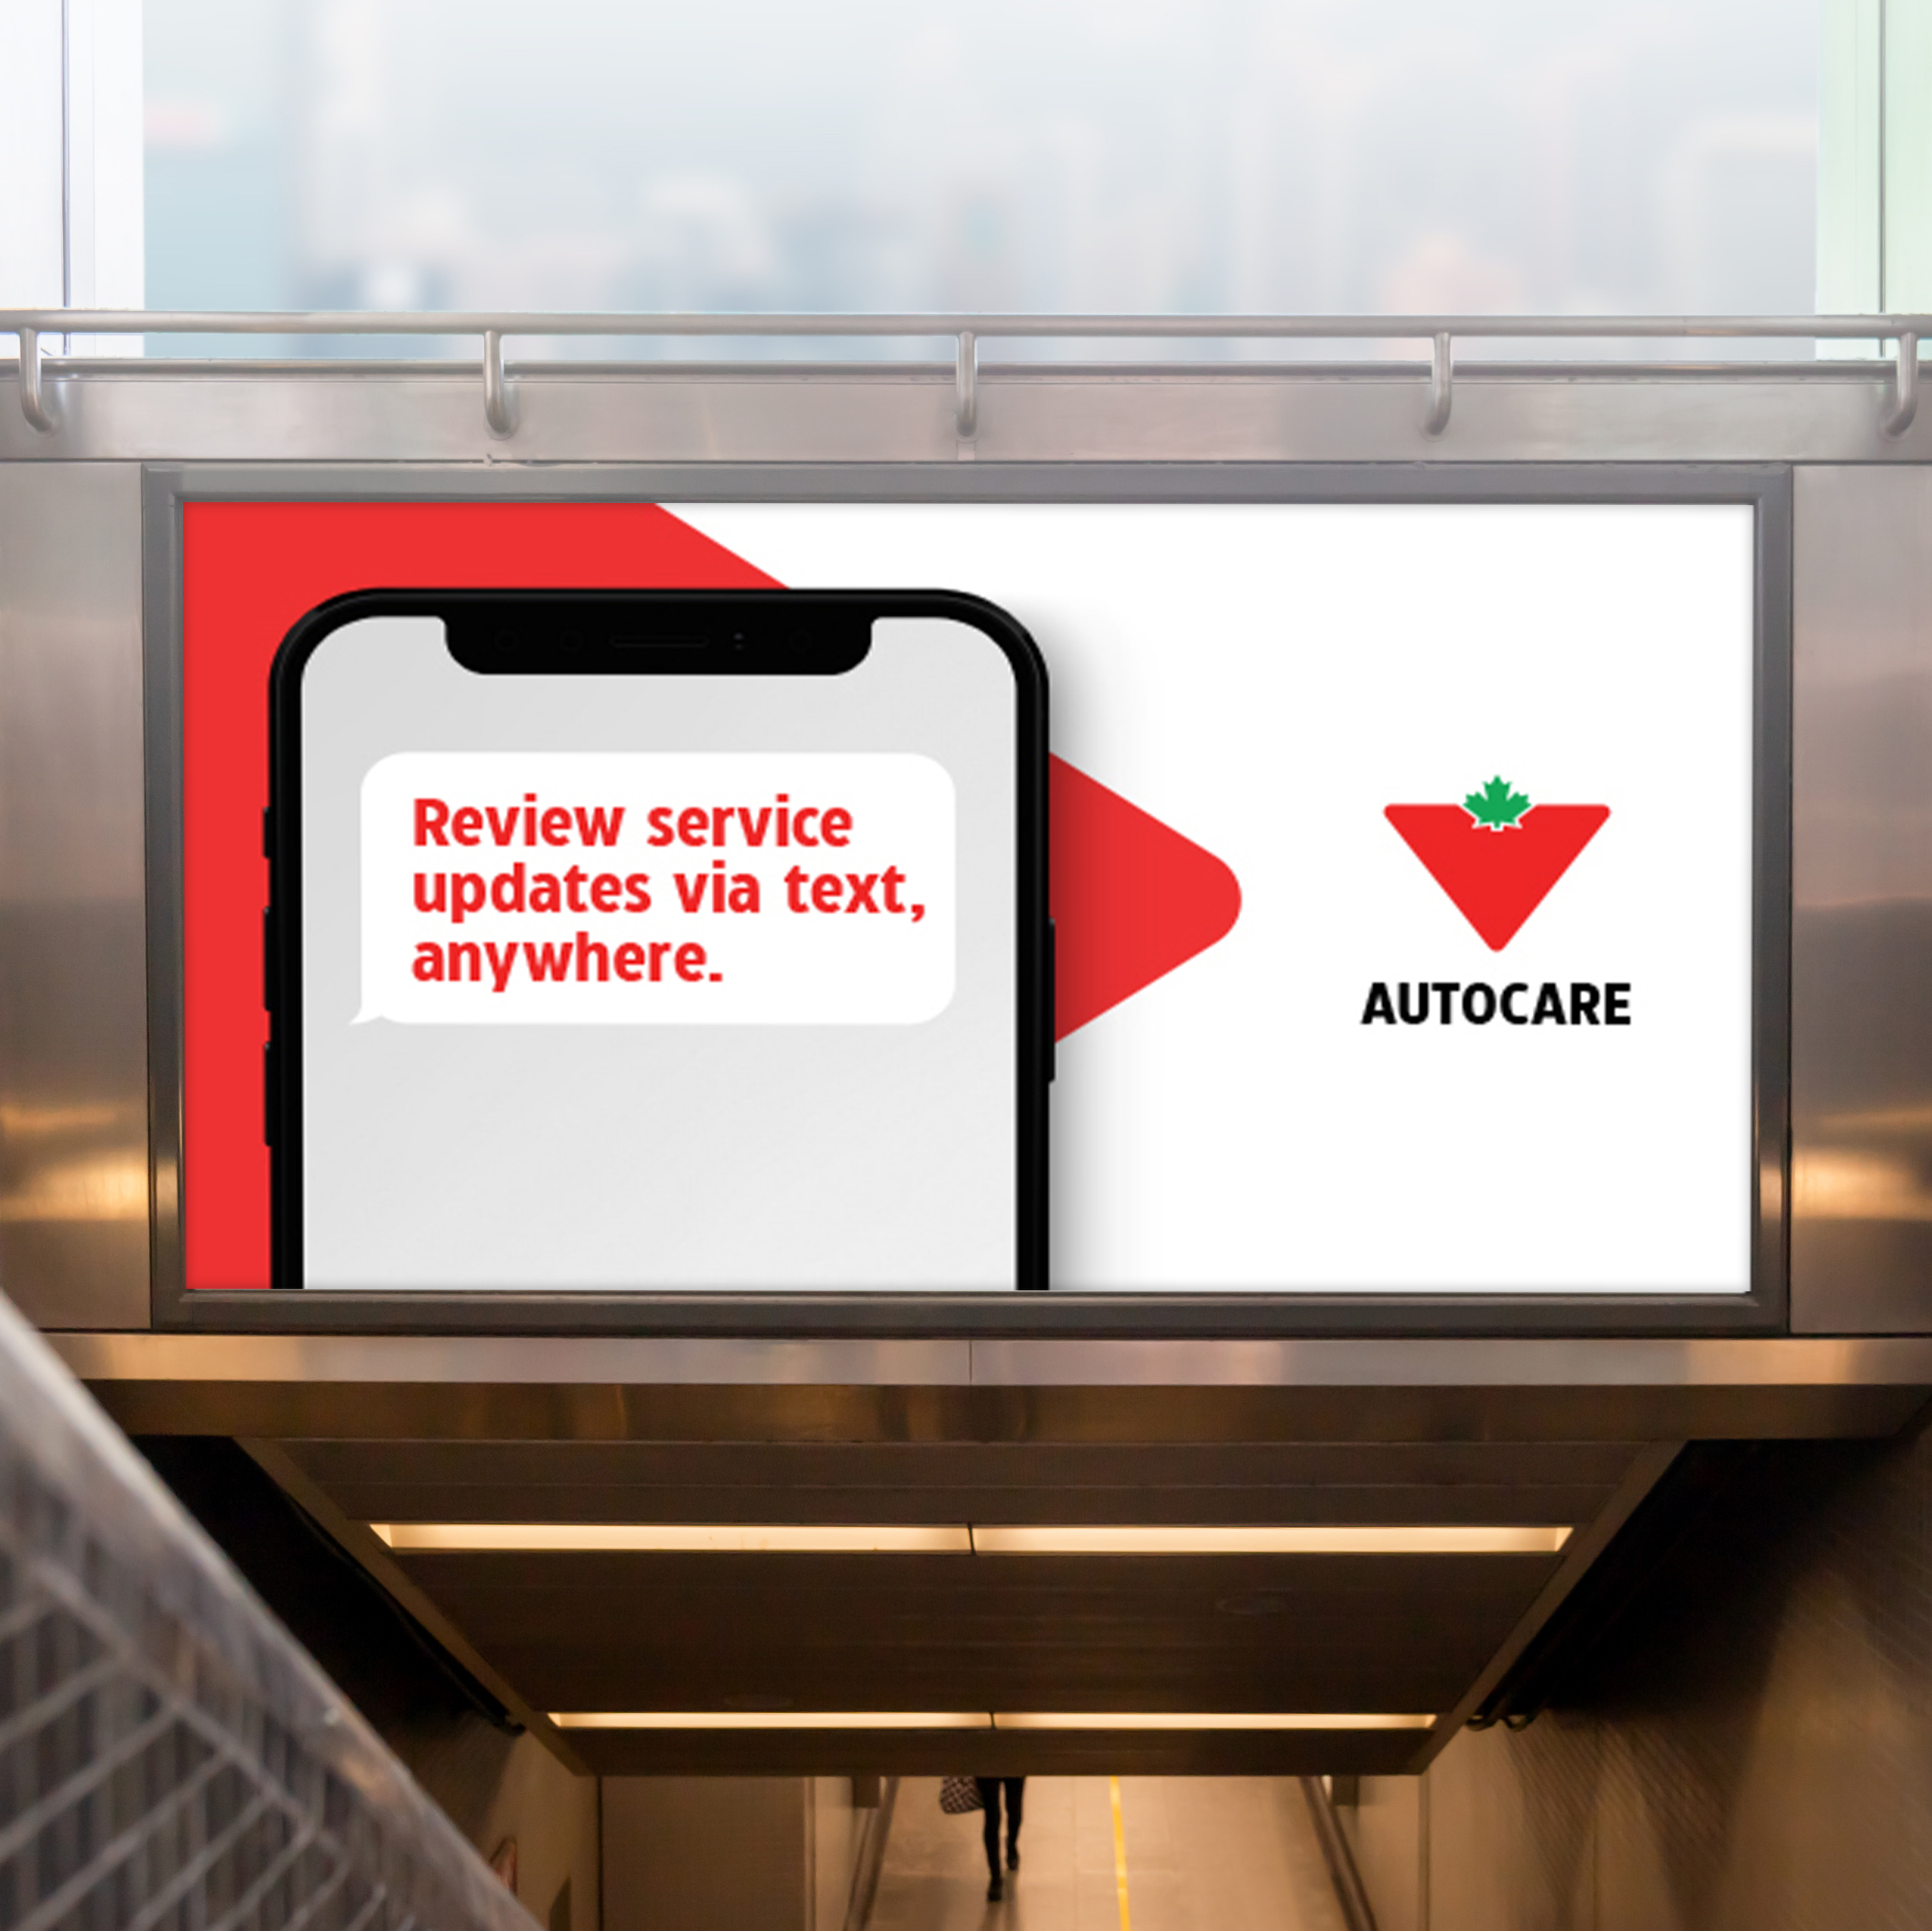 How Canadian Tire achieved a 30% lift in consideration with DOOH — DPAA panel recap